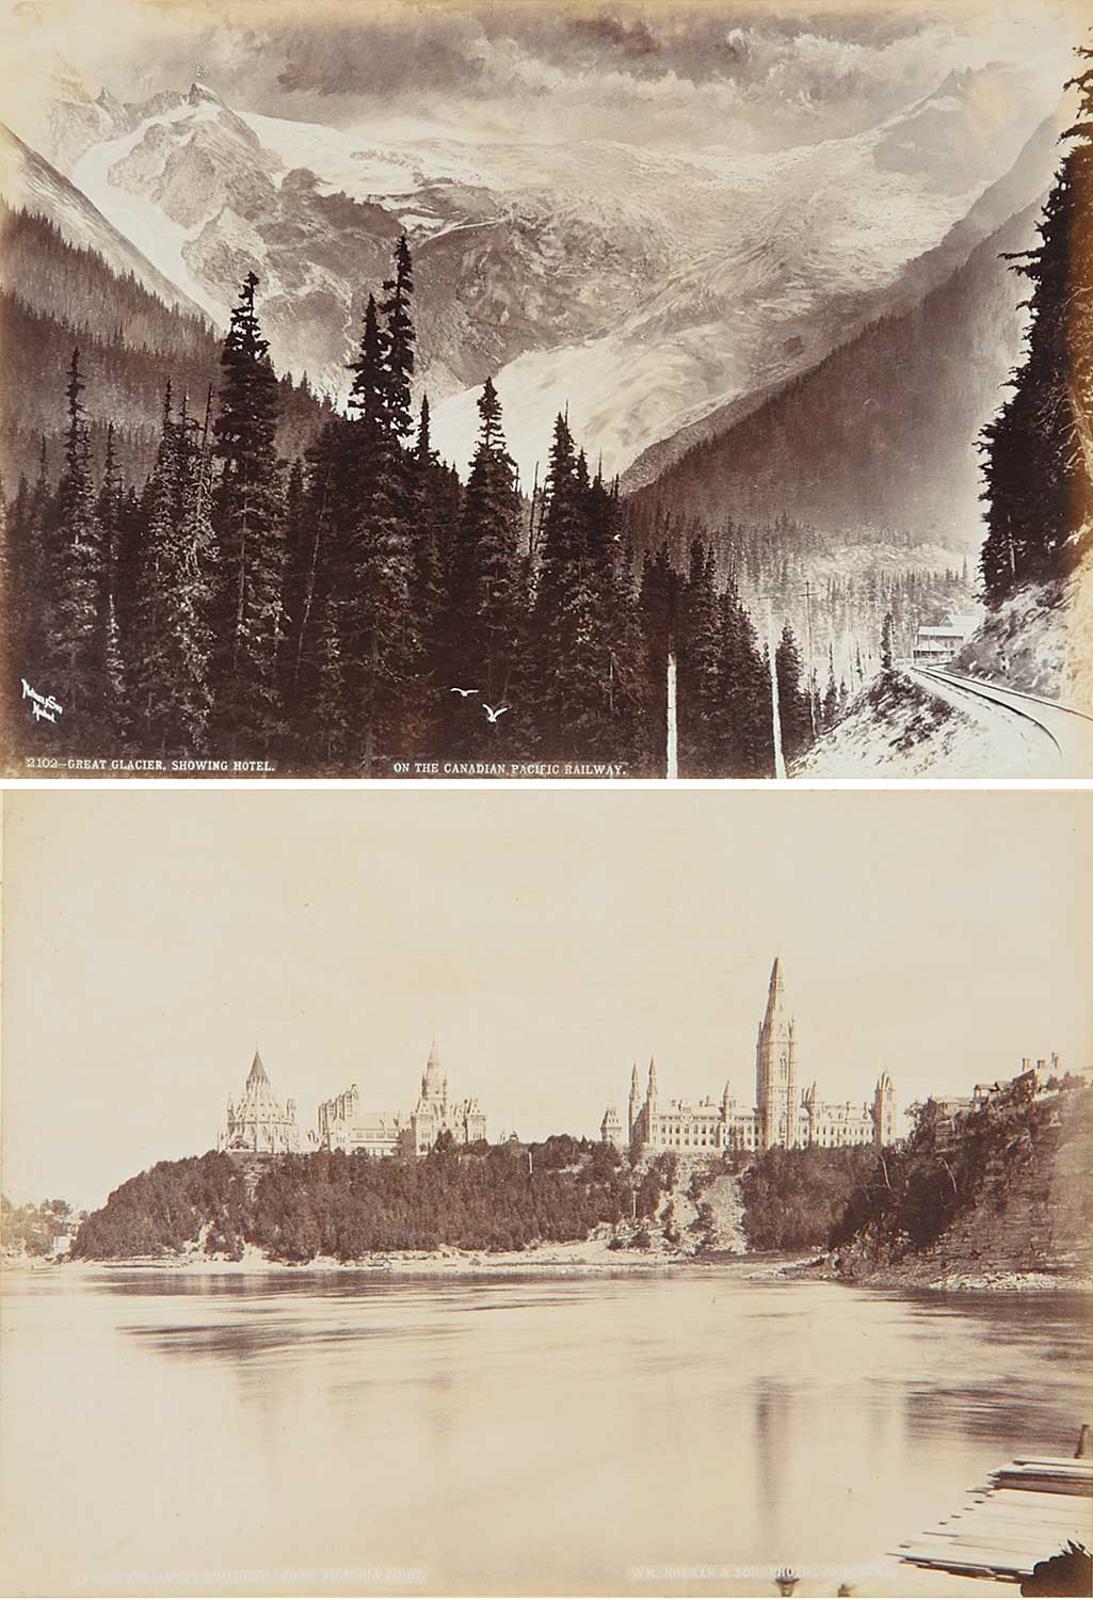 William Notman (1826-1891) - 2102 - Great Glacier Showing Hotel / 1110 - Parliament Buildings, from ZZZ